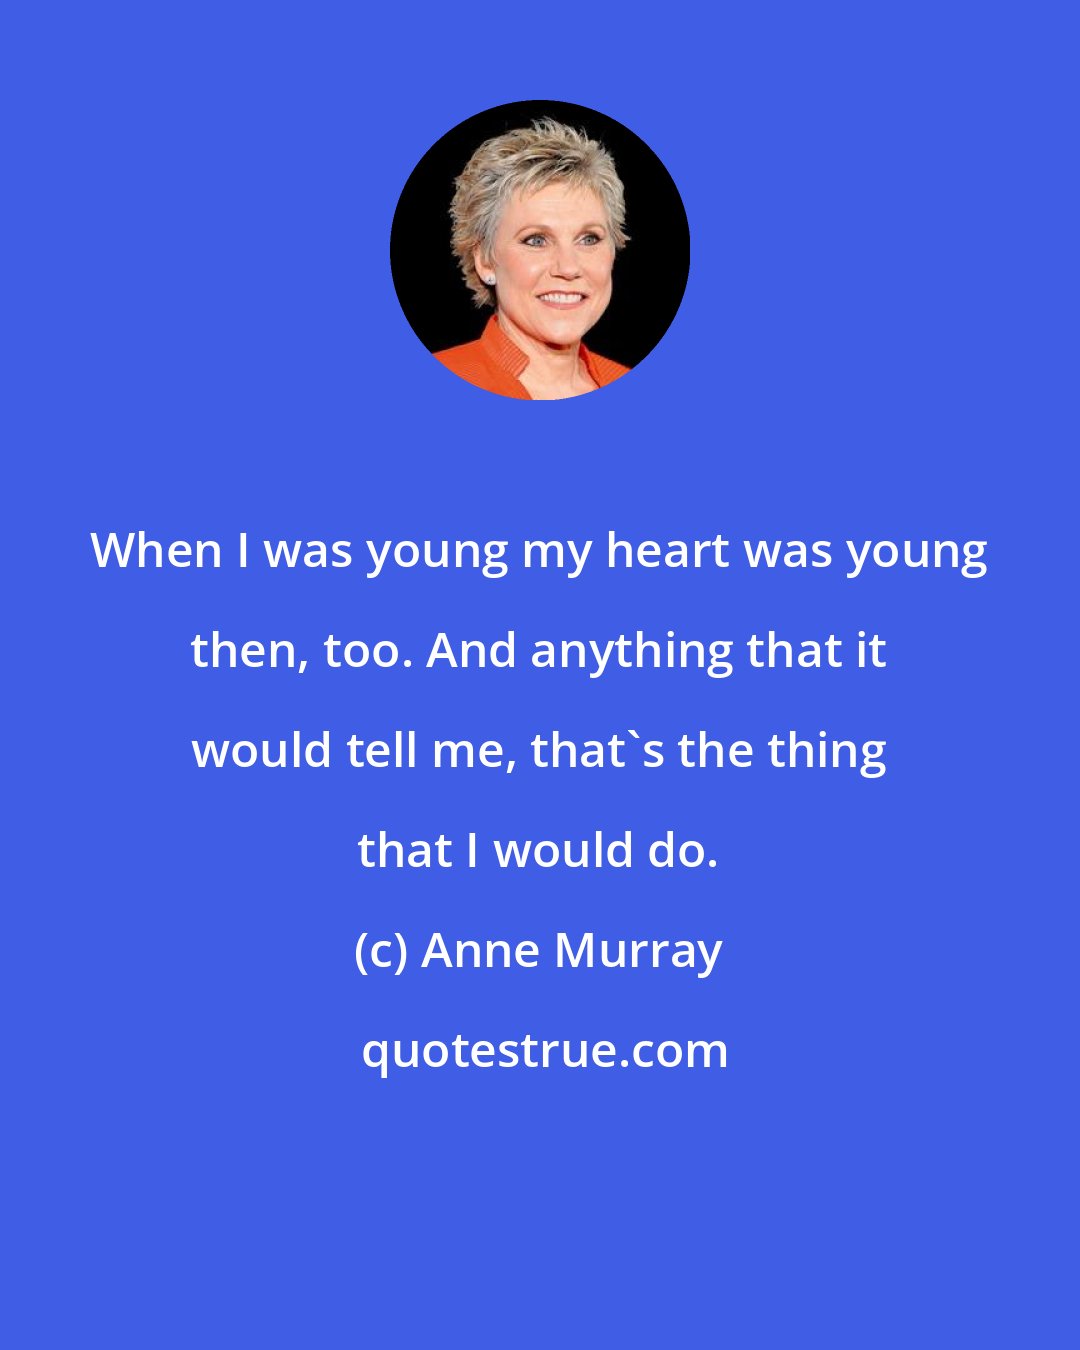 Anne Murray: When I was young my heart was young then, too. And anything that it would tell me, that's the thing that I would do.